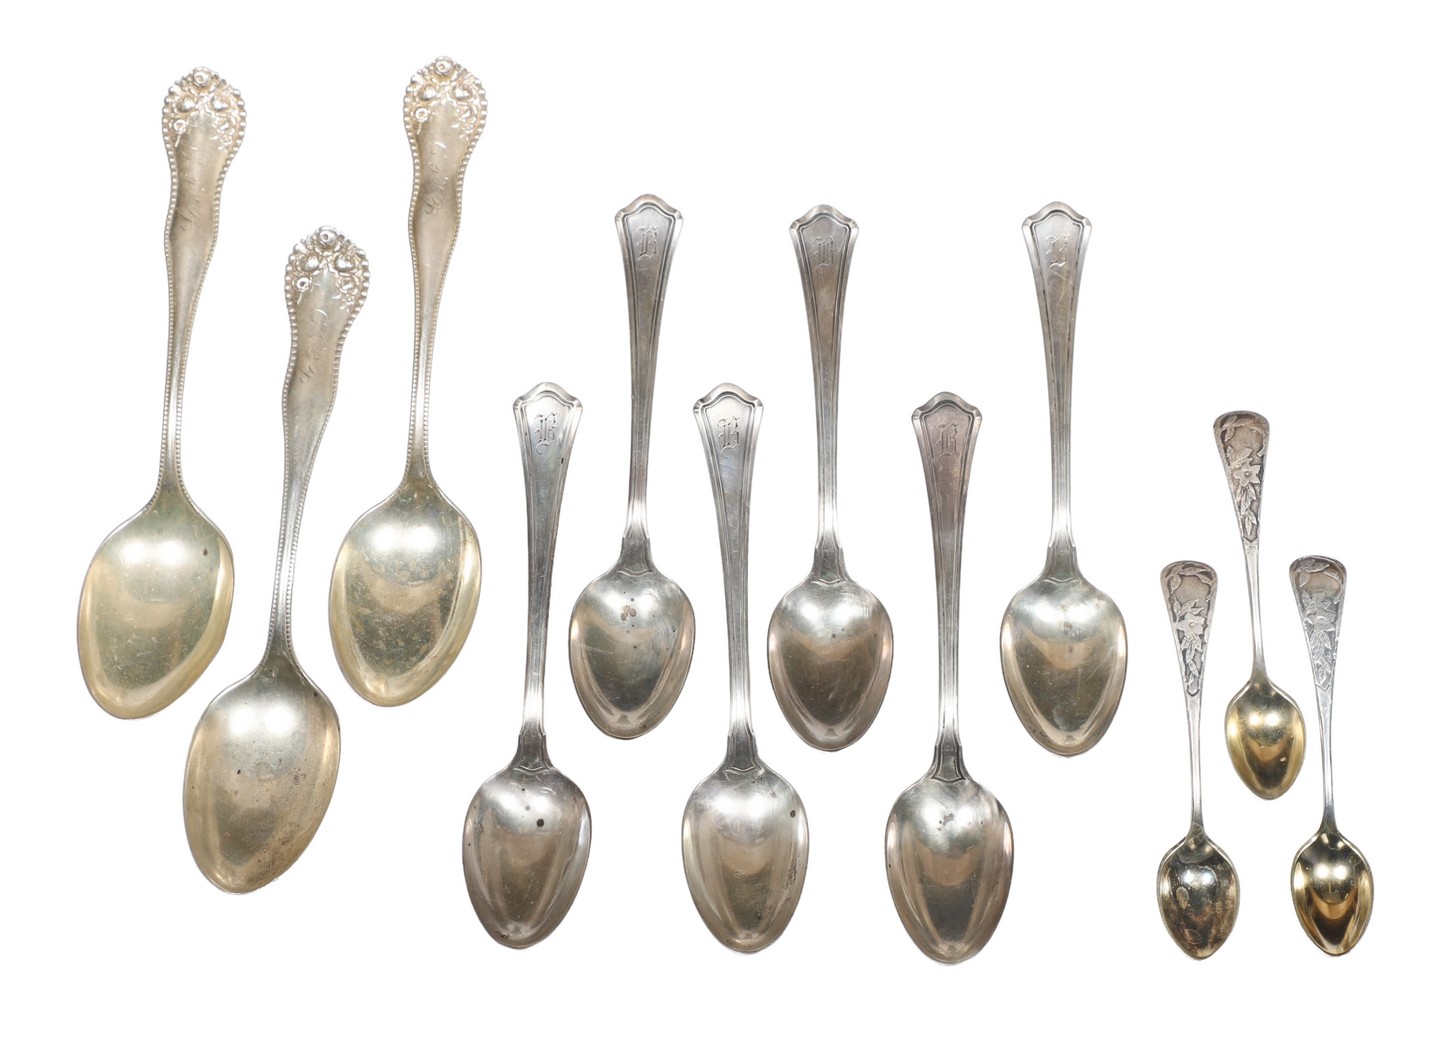  12 Sterling silver spoons 9 77 2e05ae